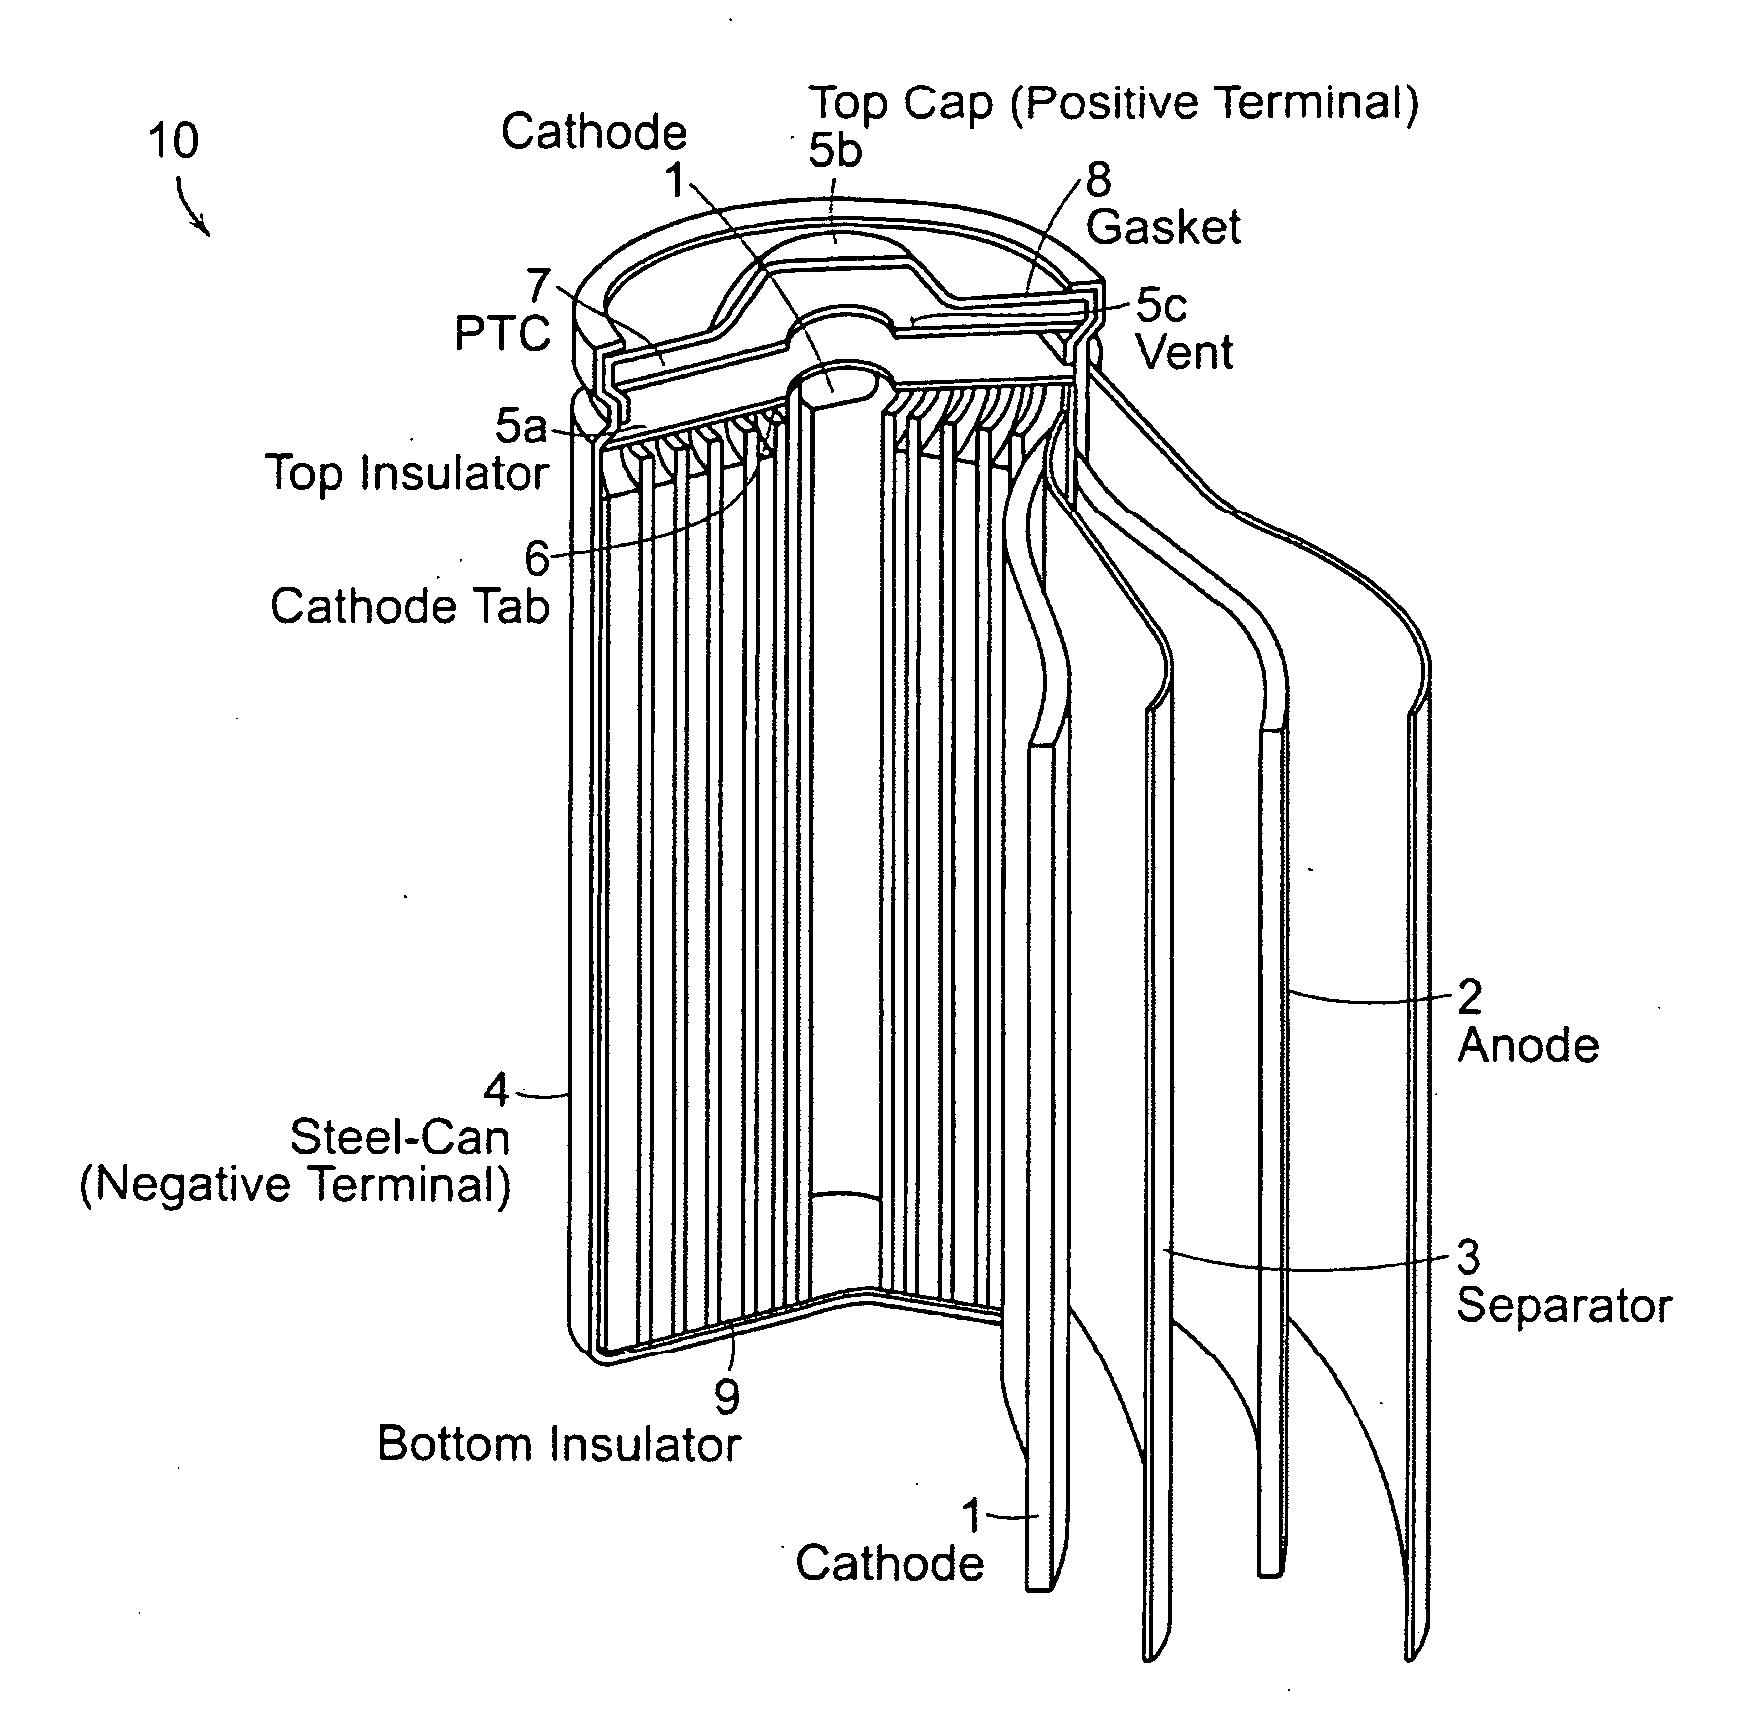 Lithium-Ion secondary battery